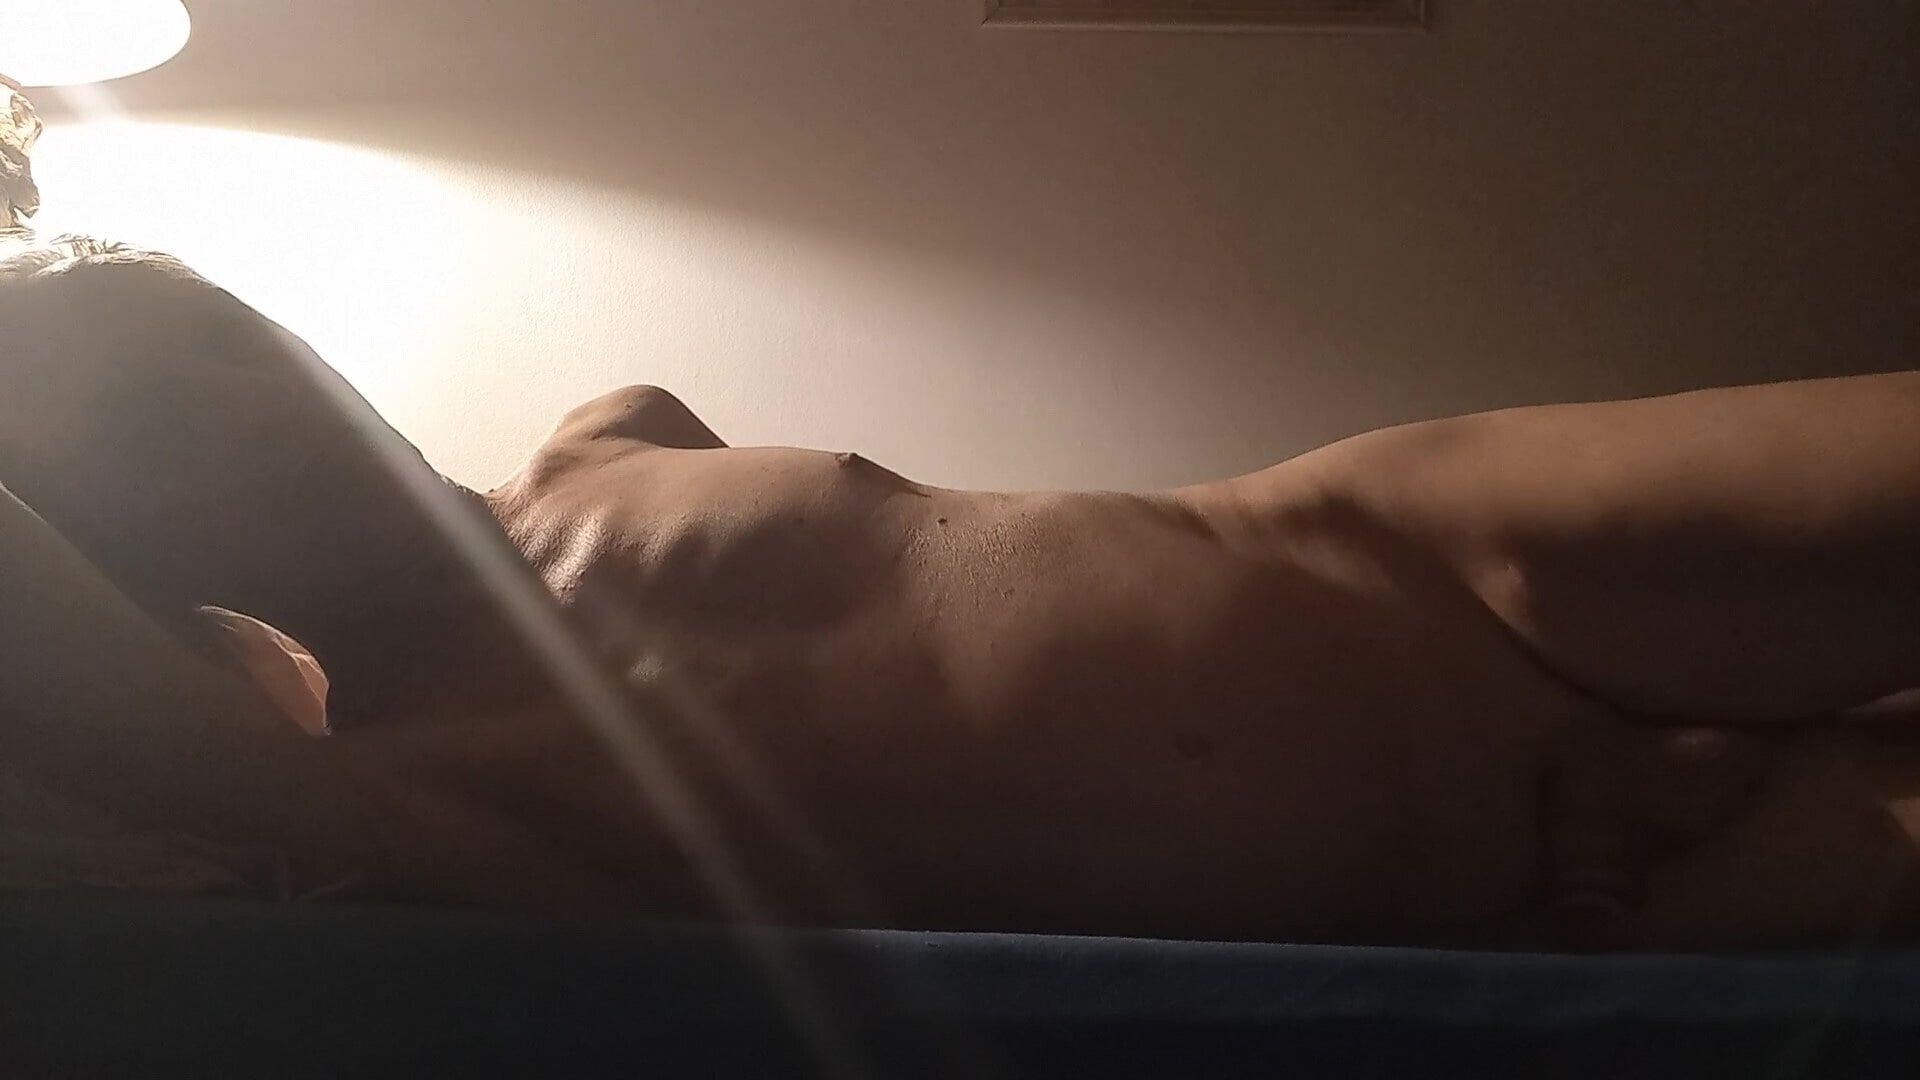 wanking and nude in bed